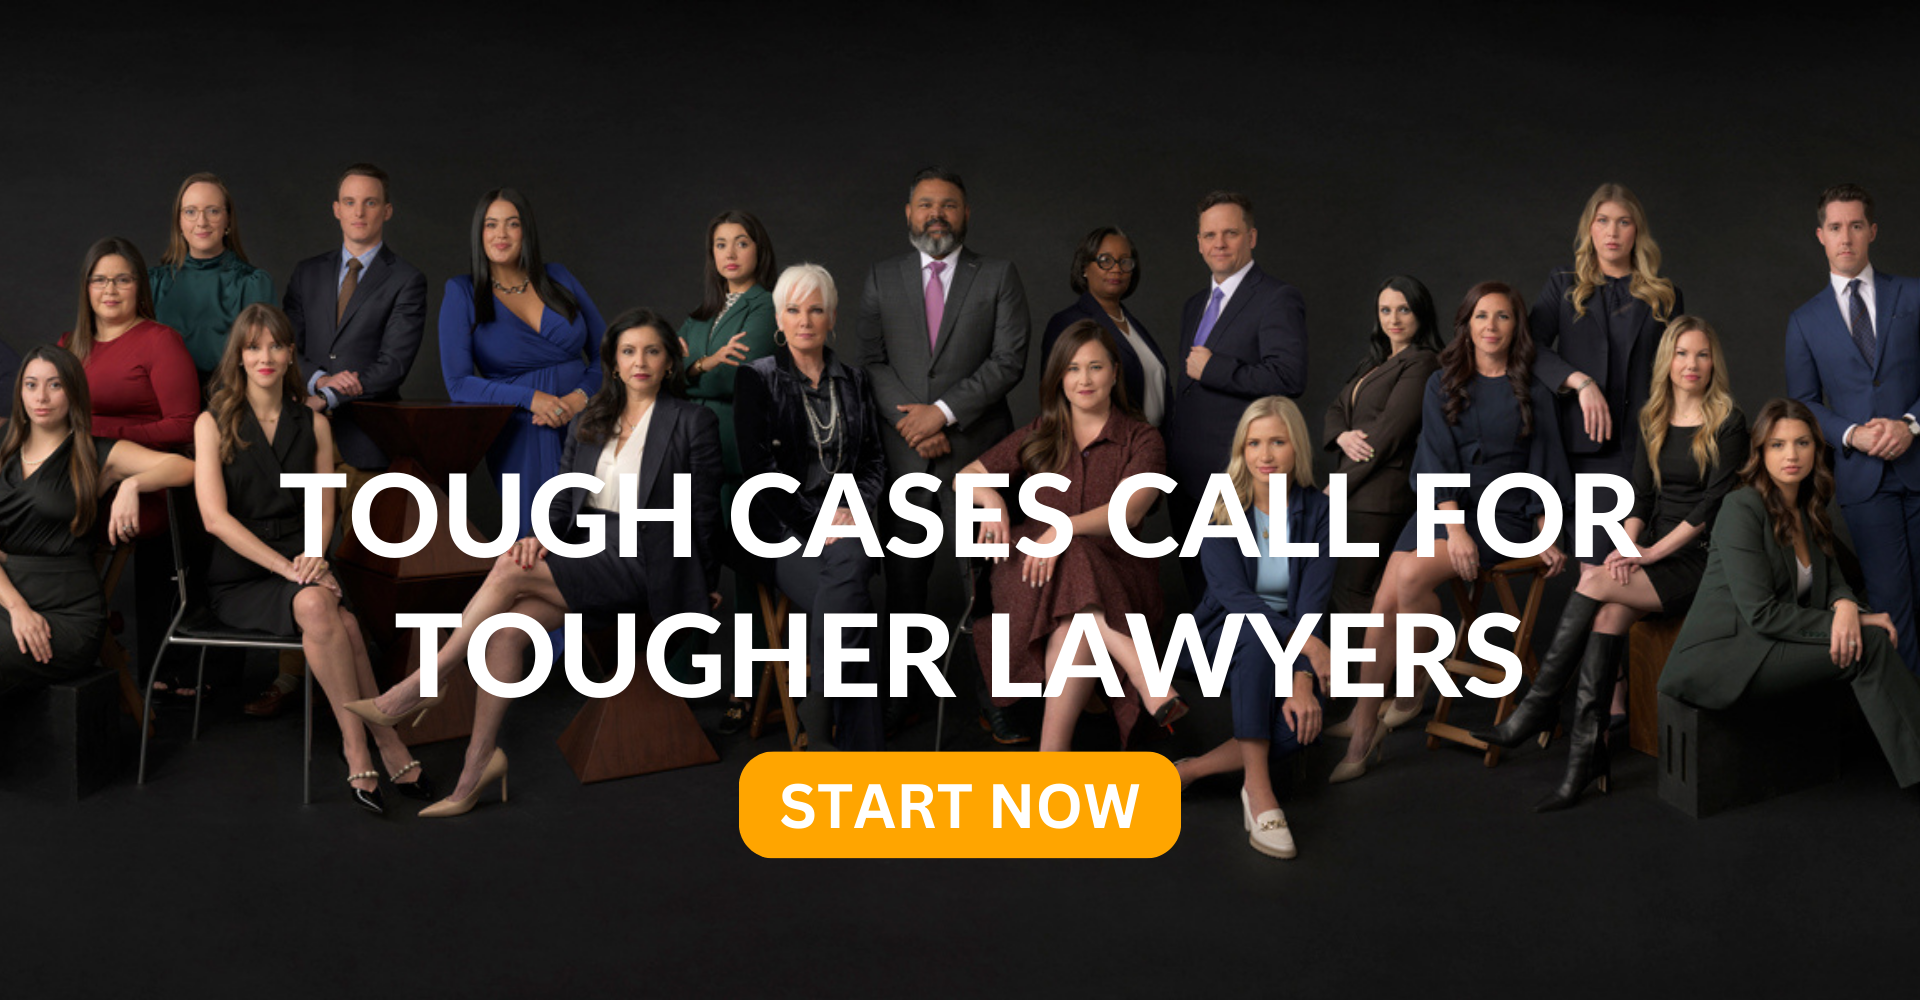 Tough cases call for the toughest lawyers.